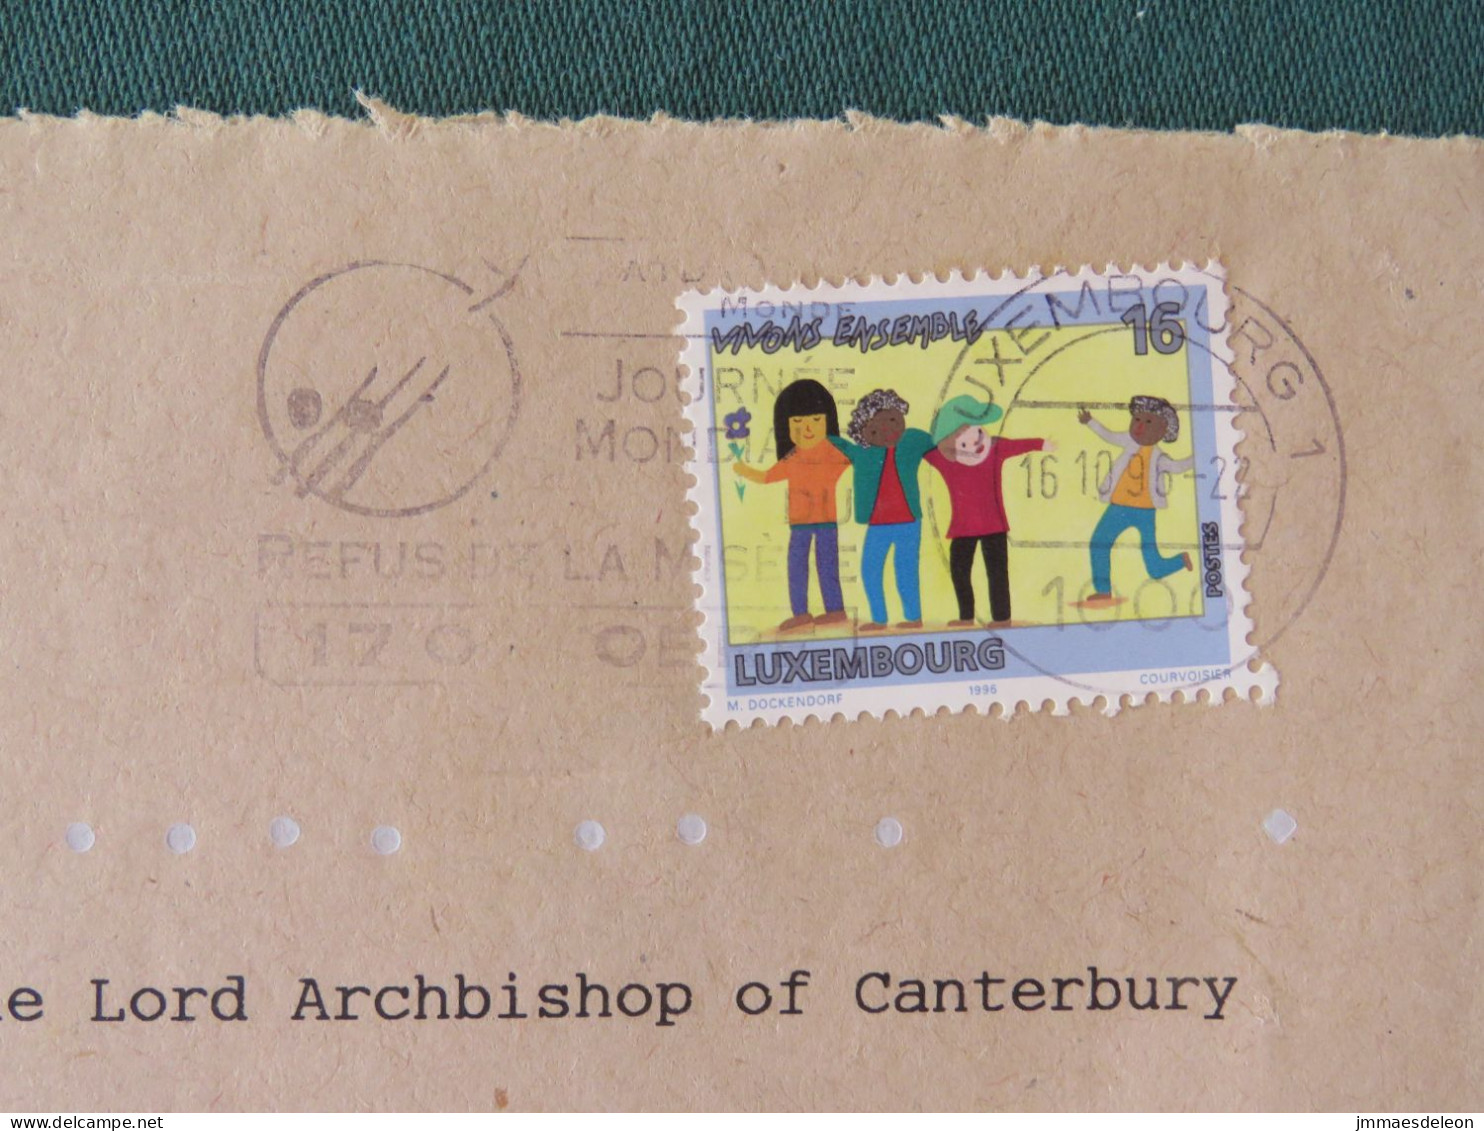 Luxembourg 1996 Cover To England - Live Together - Lettres & Documents